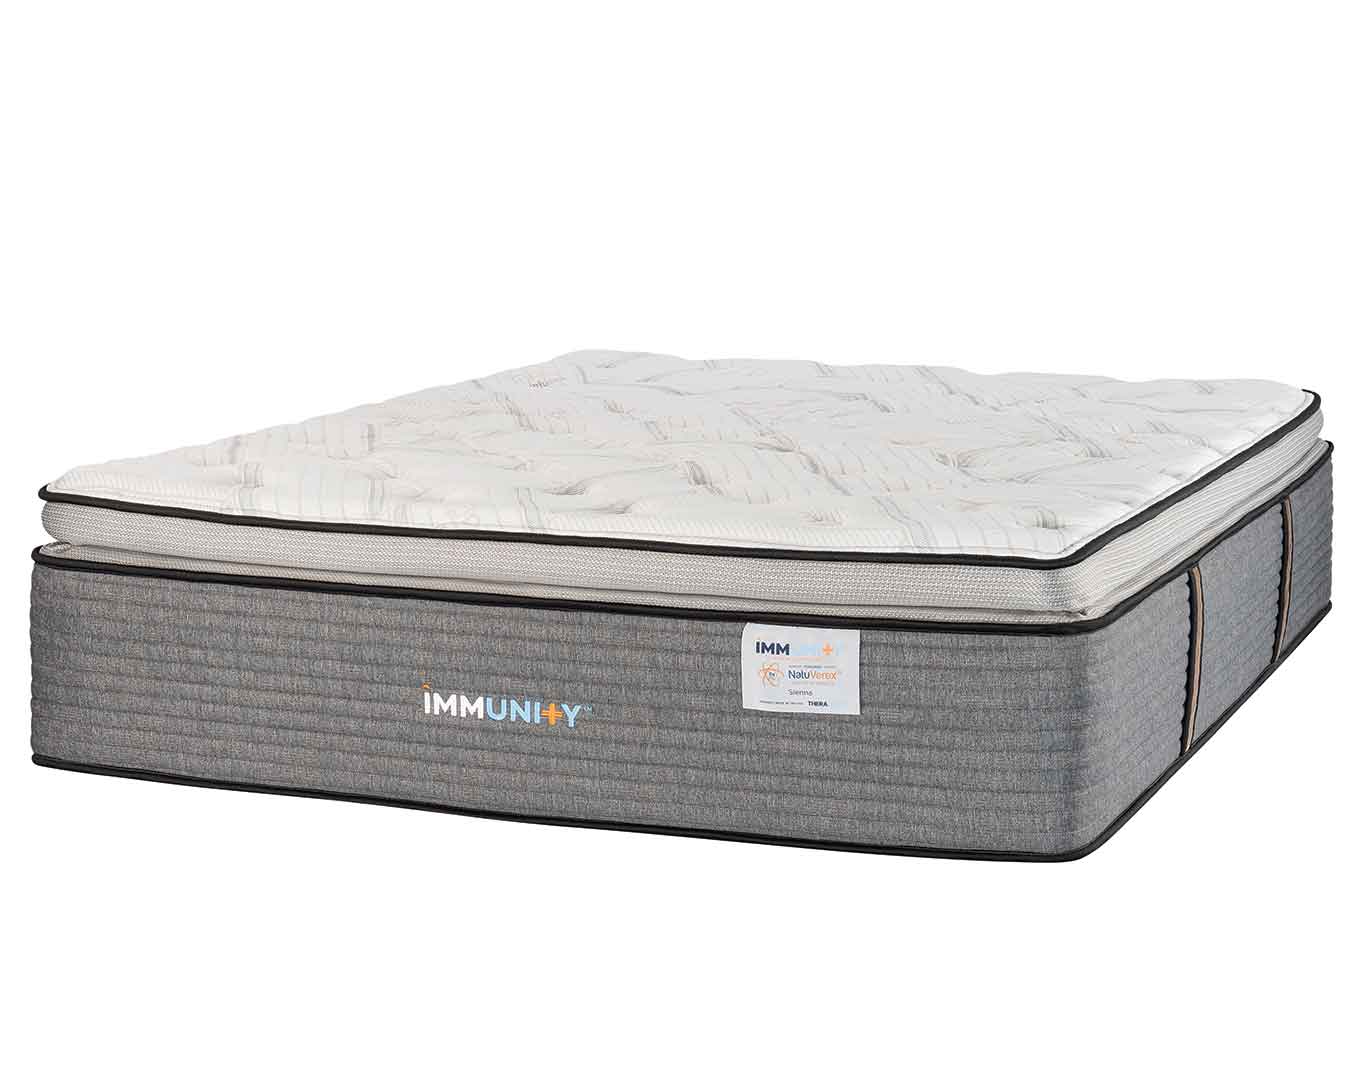 Immunity Sienna copper mattress at an angle with a white background.